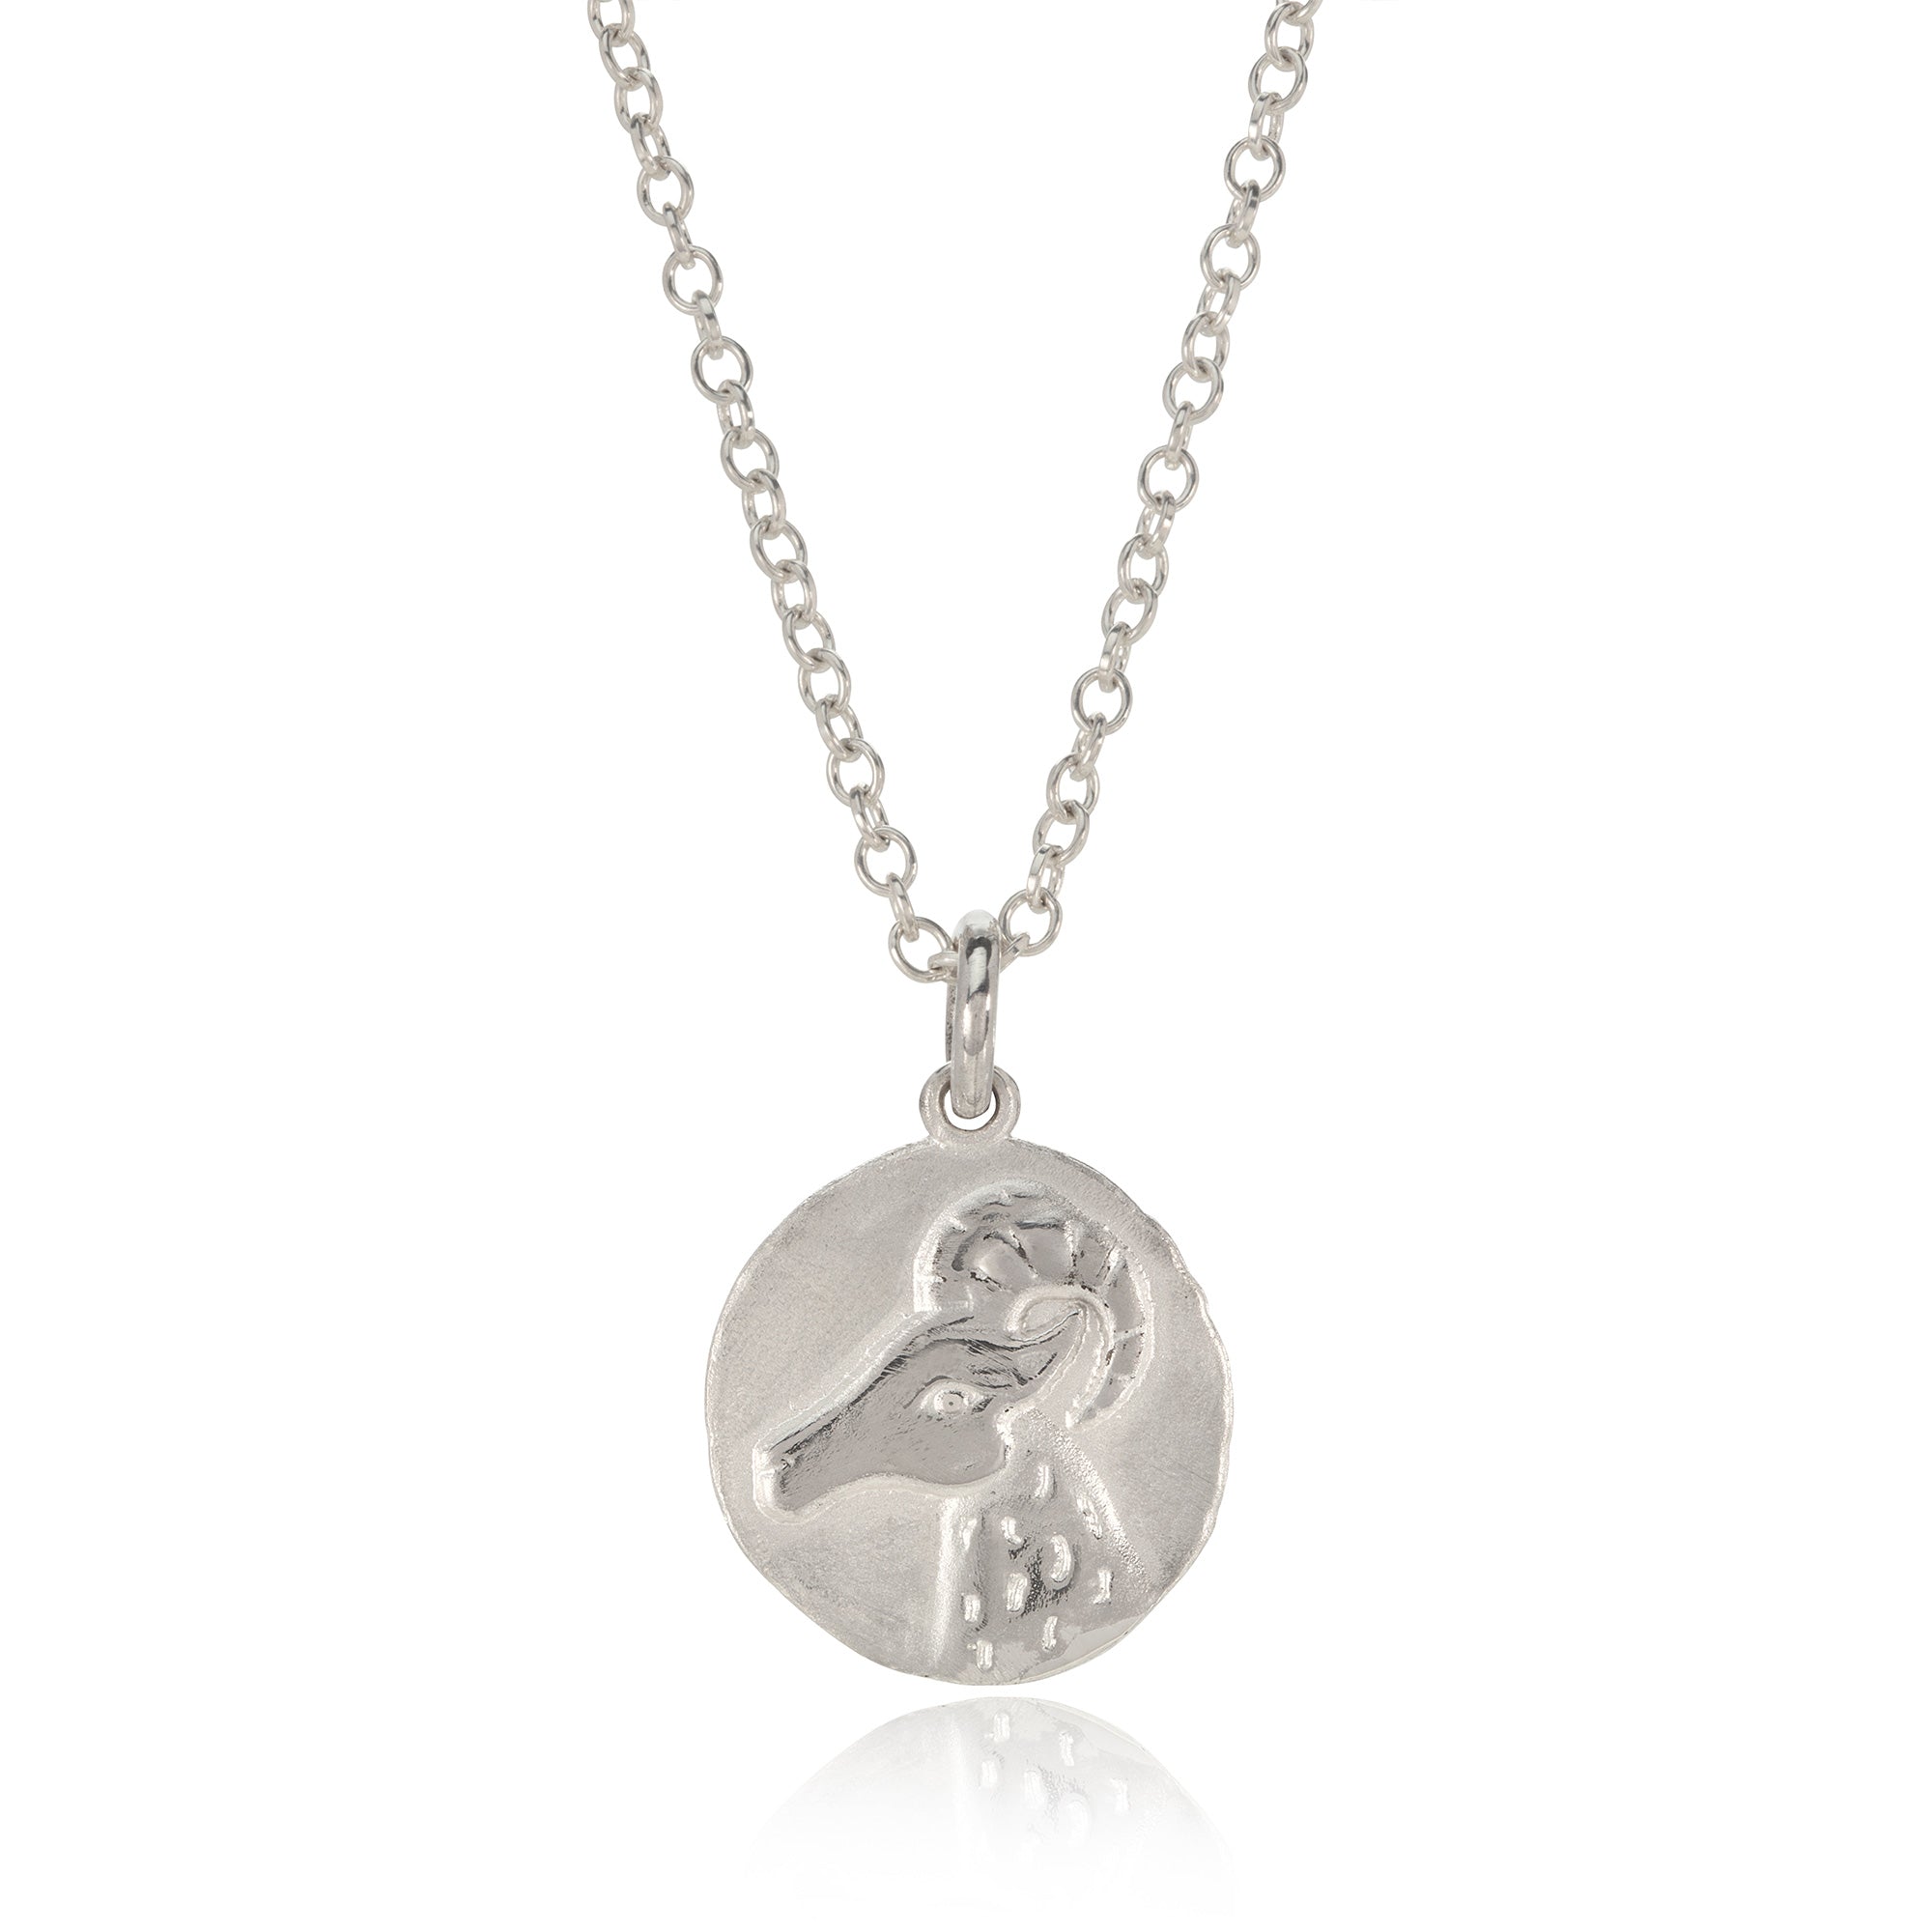 Silver Aries Pendant photographed on a white background